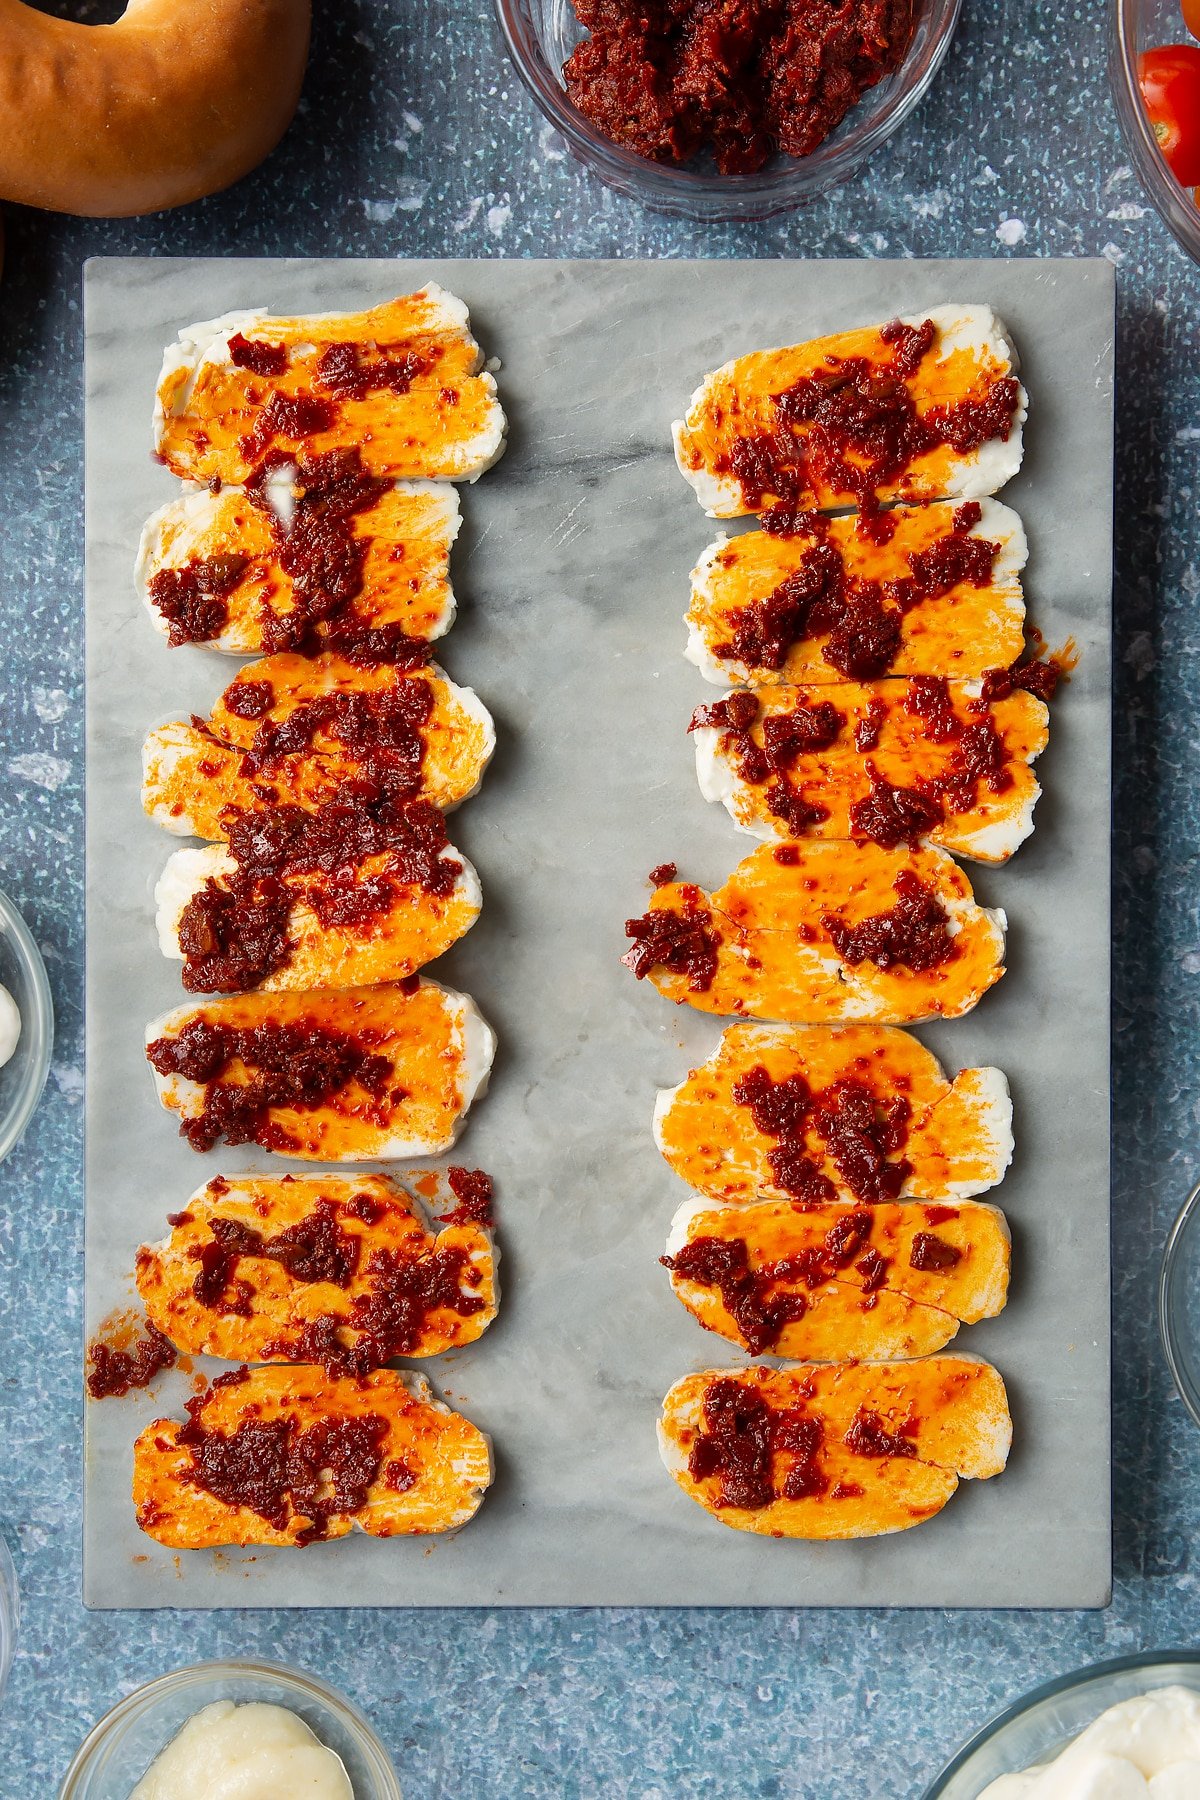 Slices of halloumi brushed with harissa paste on a marble board. Ingredients to make halloumi bagels surround the board.